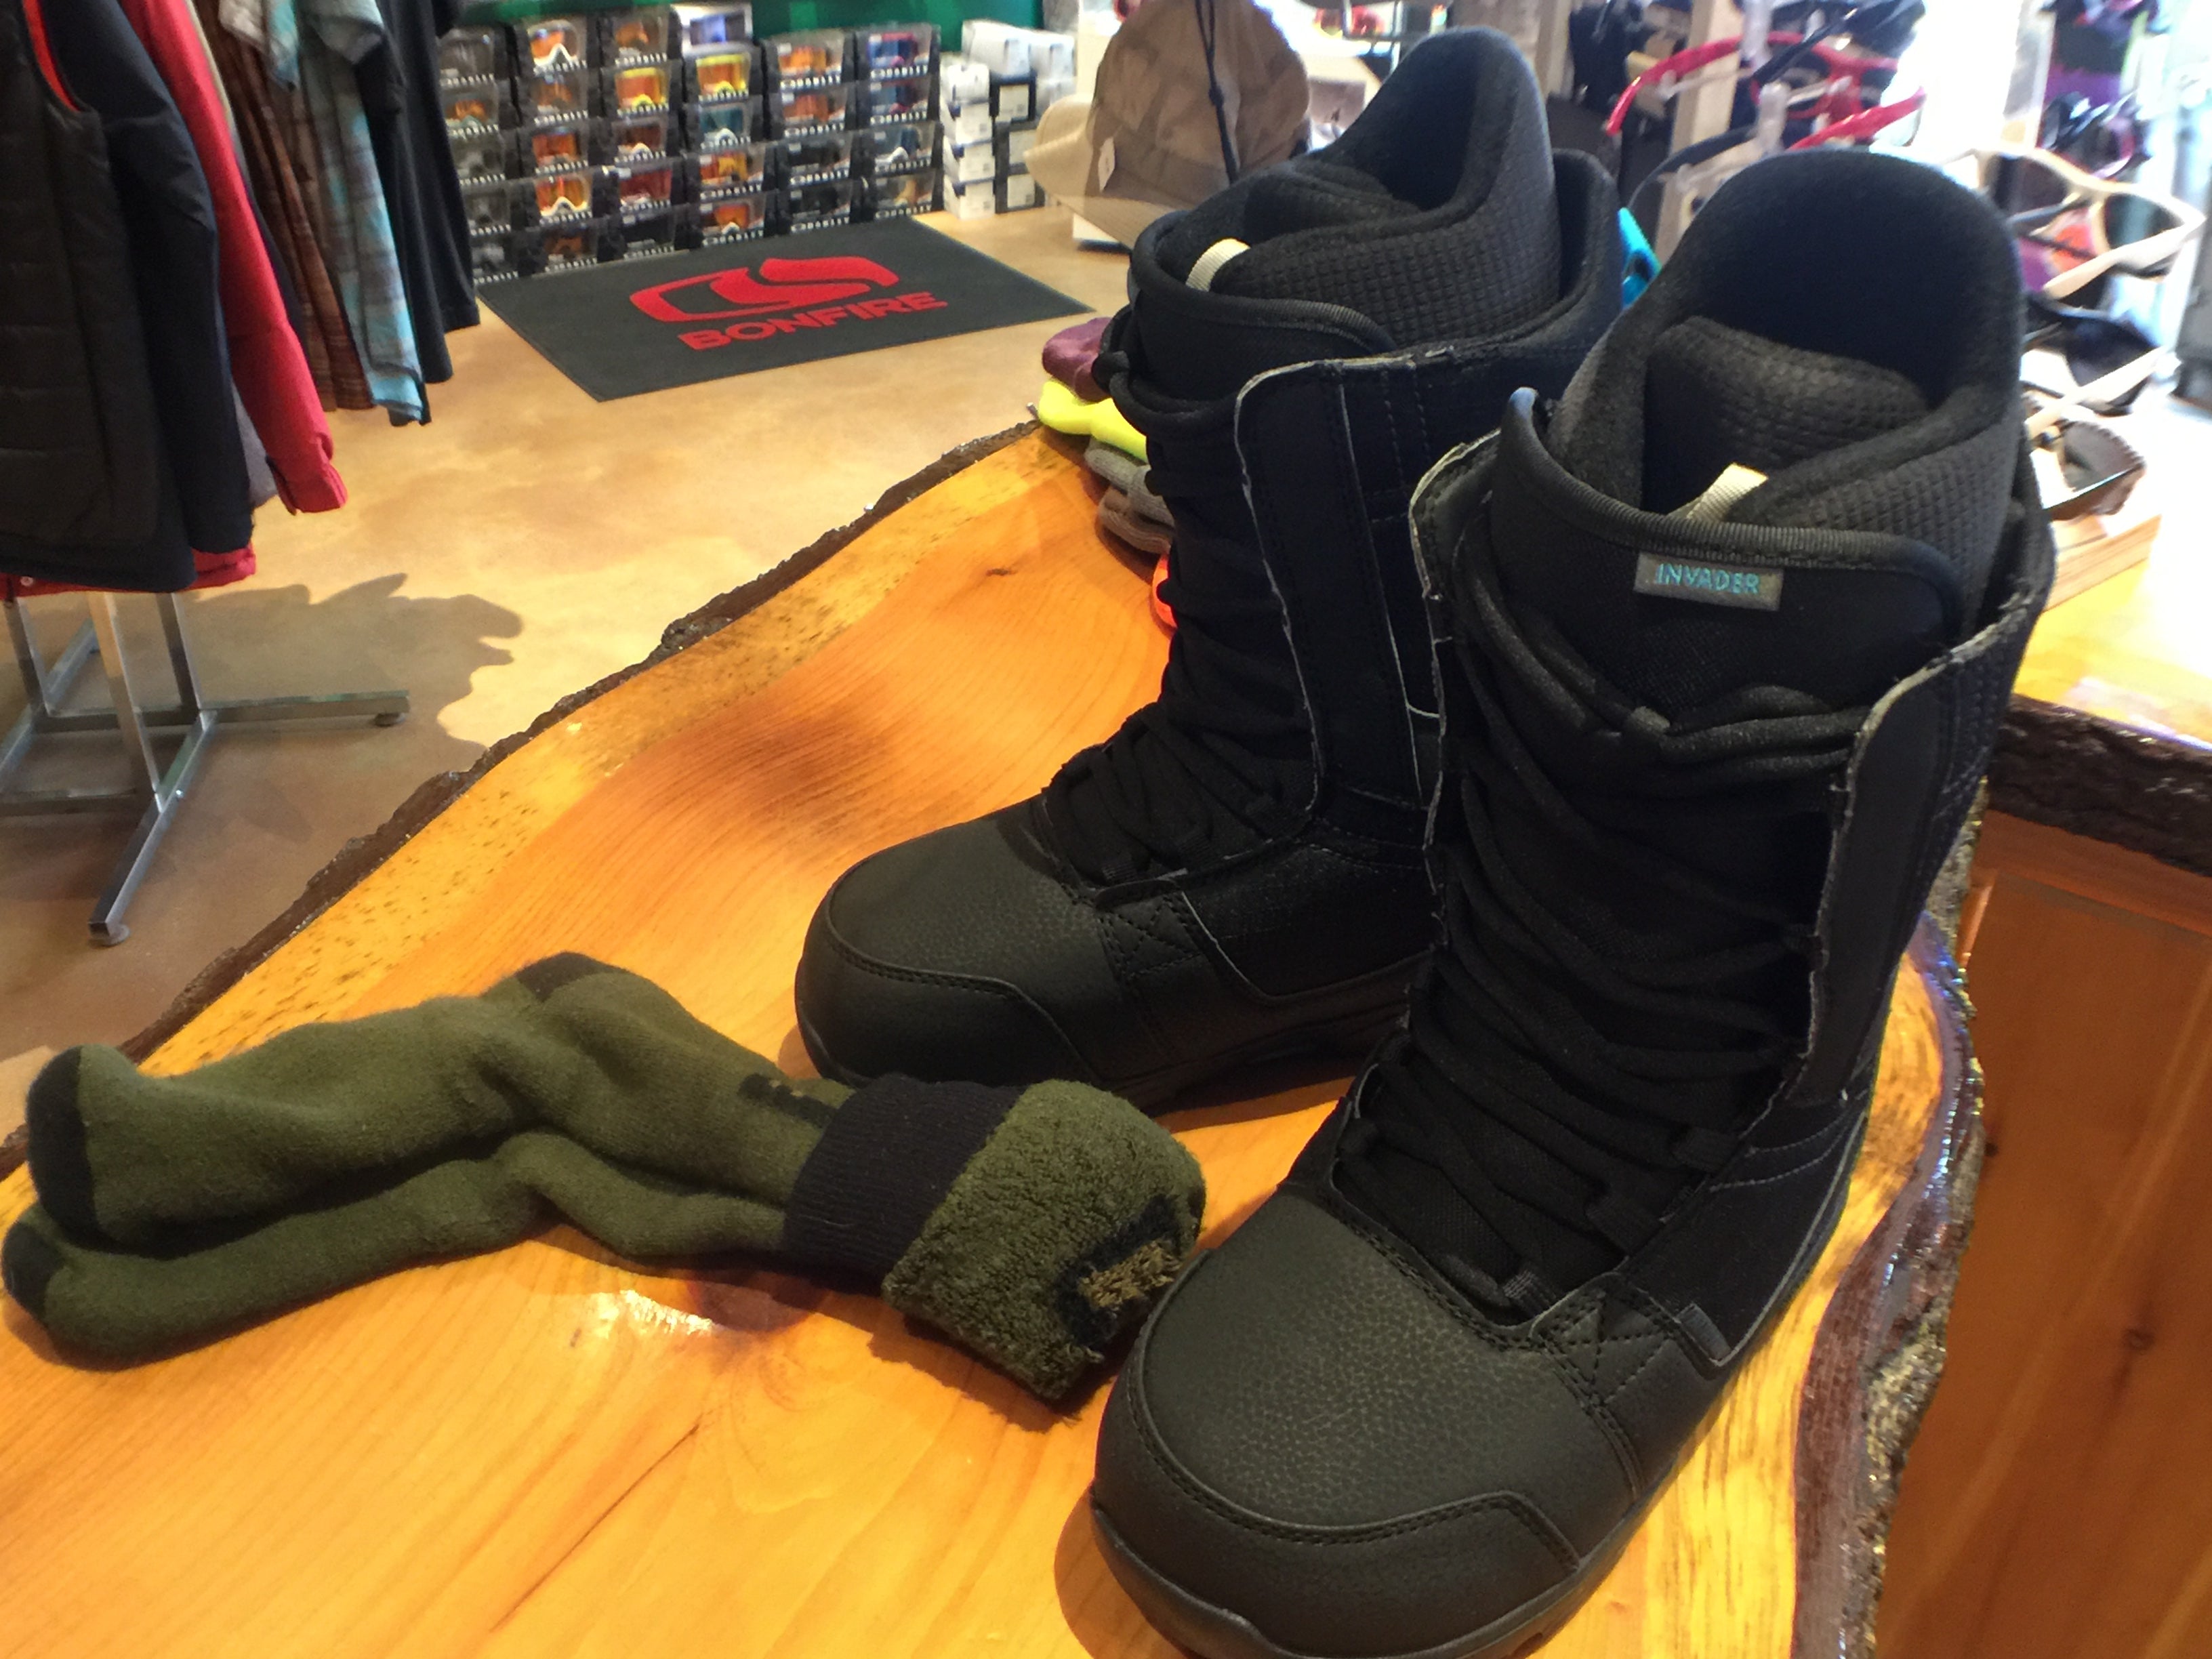 How To Try On Your New Snowboard Boots